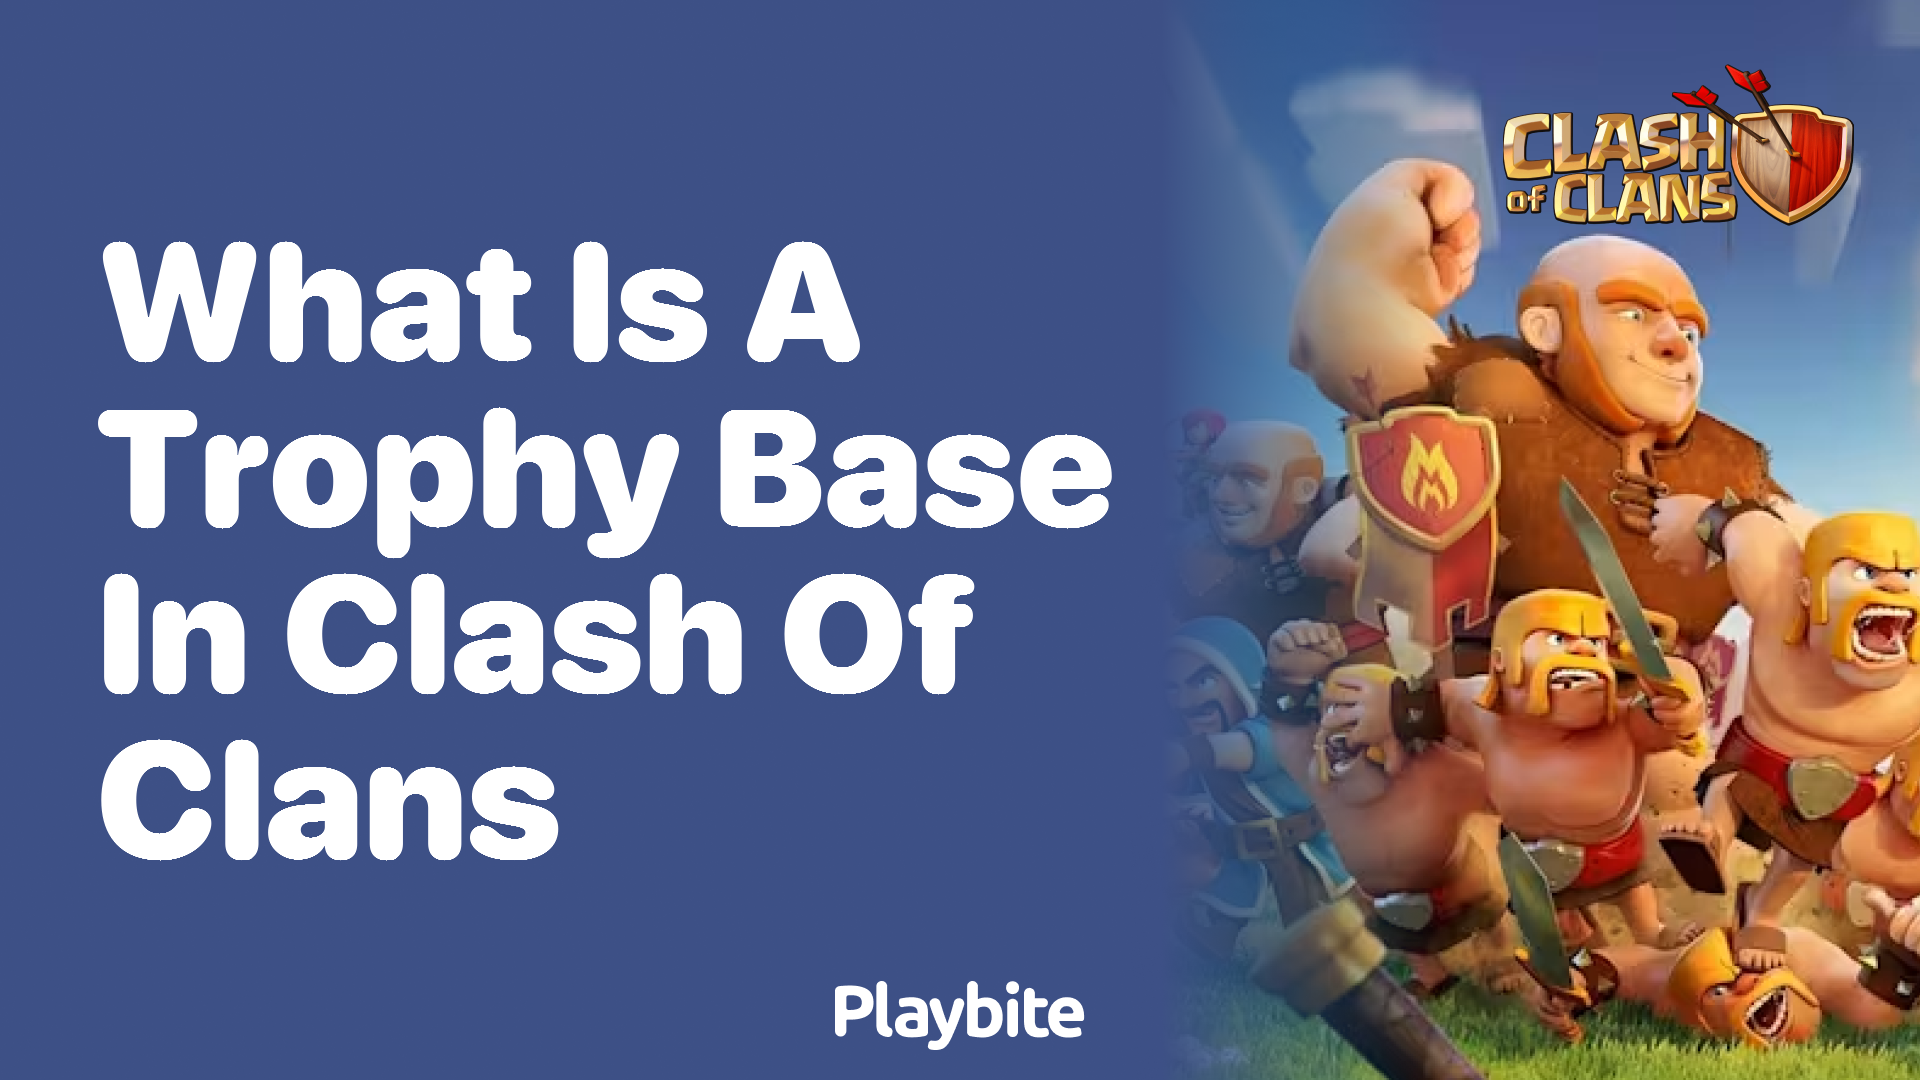 What Is a Trophy Base in Clash of Clans?